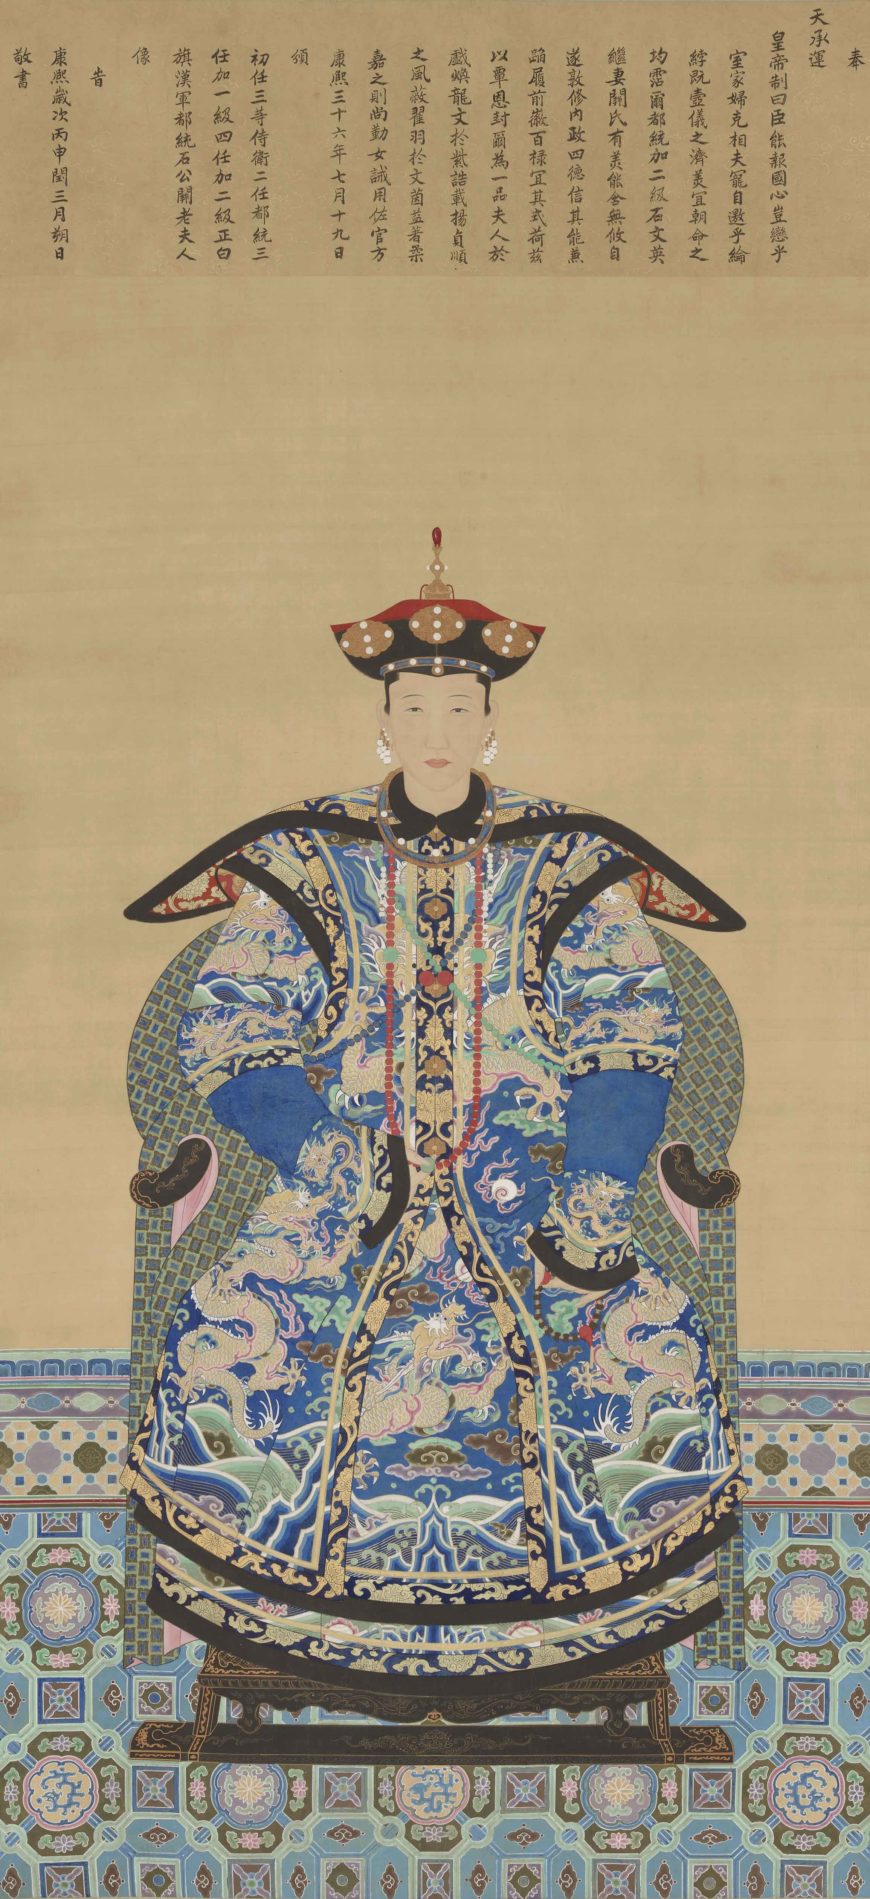 Portrait of Lady Guan, Qing dynasty, Kangxi reign or later, mid 17th-early 18th century, ink and color on silk, China 343 x 145 cm (Arthur M. Sackler Gallery, Smithsonian Institution, Washington, DC: Purchase — Smithsonian Collections Acquisition Program and partial gift of Richard G. Pritzlaff, S1991.121)